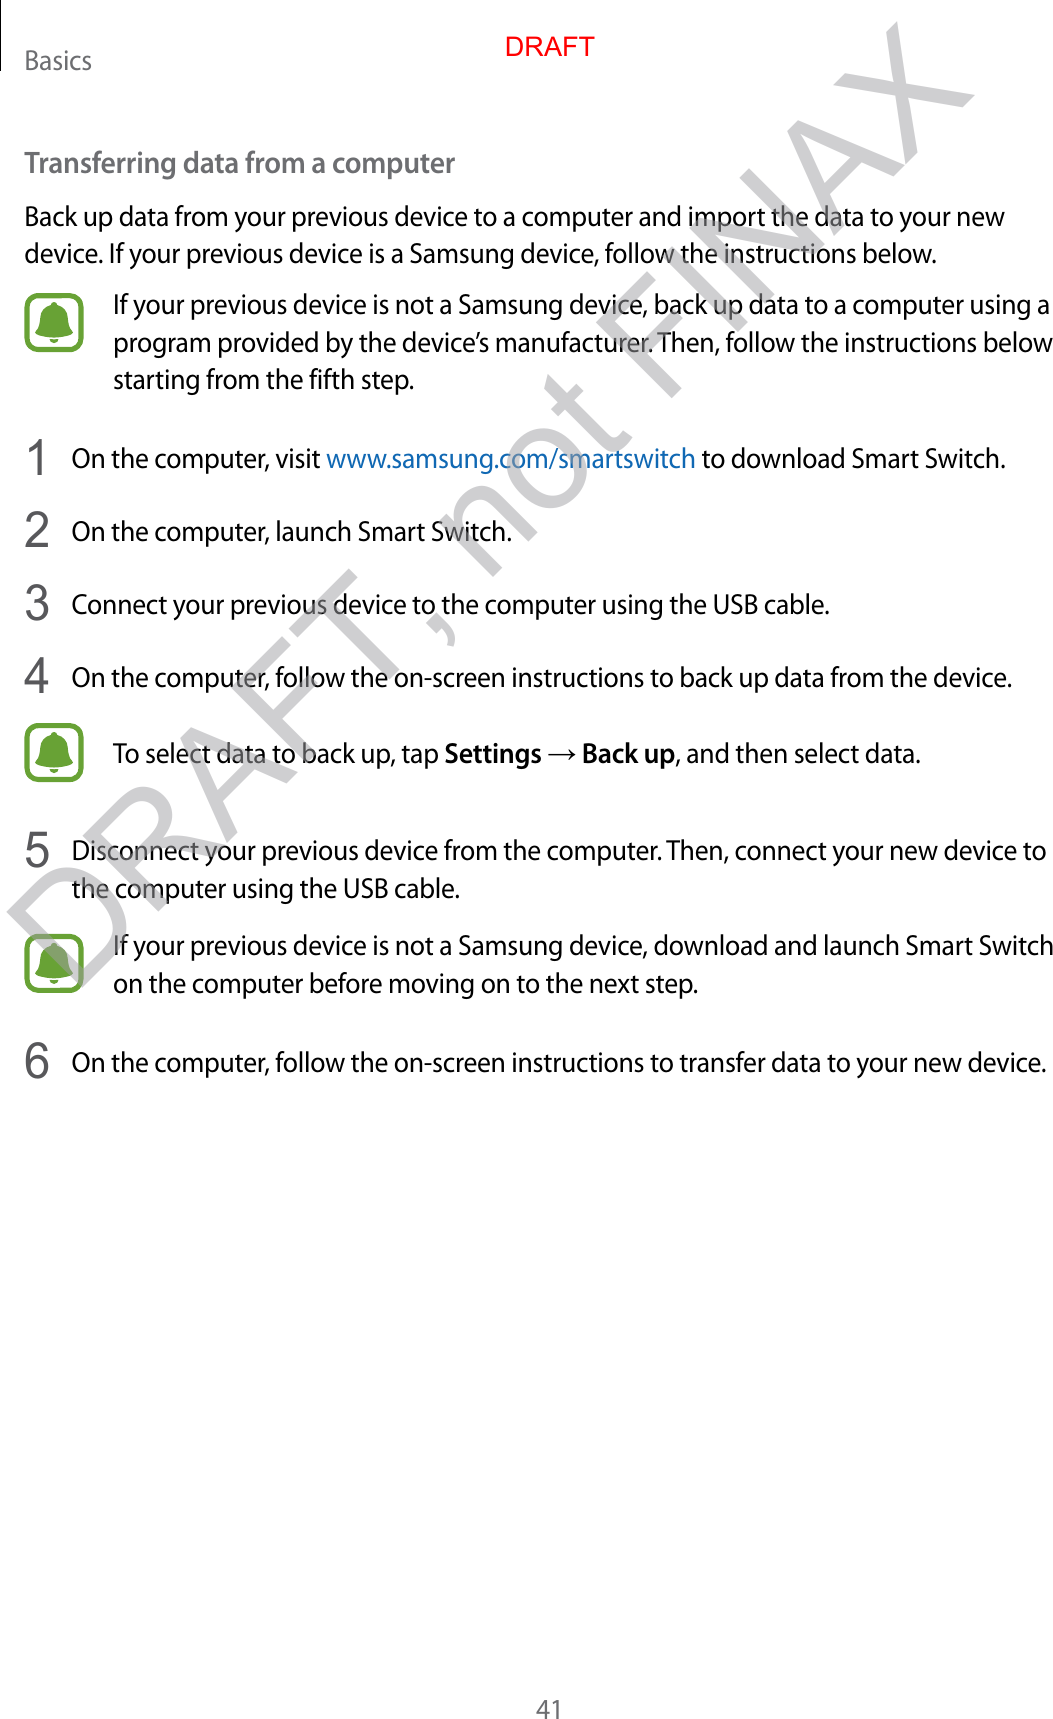 Basics41Transferring data from a computerBack up data from your previous device to a computer and import the data to your new device. If your previous device is a Samsung device, follow the instructions below.If your previous device is not a Samsung device, back up data to a computer using a program provided by the device’s manufacturer. Then, follow the instructions below starting from the fifth step.1  On the computer, visit www.samsung.com/smartswitch to download Smart Switch.2  On the computer, launch Smart Switch.3  Connect your previous device to the computer using the USB cable.4  On the computer, follow the on-screen instructions to back up data from the device.To select data to back up, tap Settings → Back up, and then select data.5  Disconnect your previous device from the computer. Then, connect your new device to the computer using the USB cable.If your previous device is not a Samsung device, download and launch Smart Switch on the computer before moving on to the next step.6  On the computer, follow the on-screen instructions to transfer data to your new device.DRAFTDRAFT, not FINAX